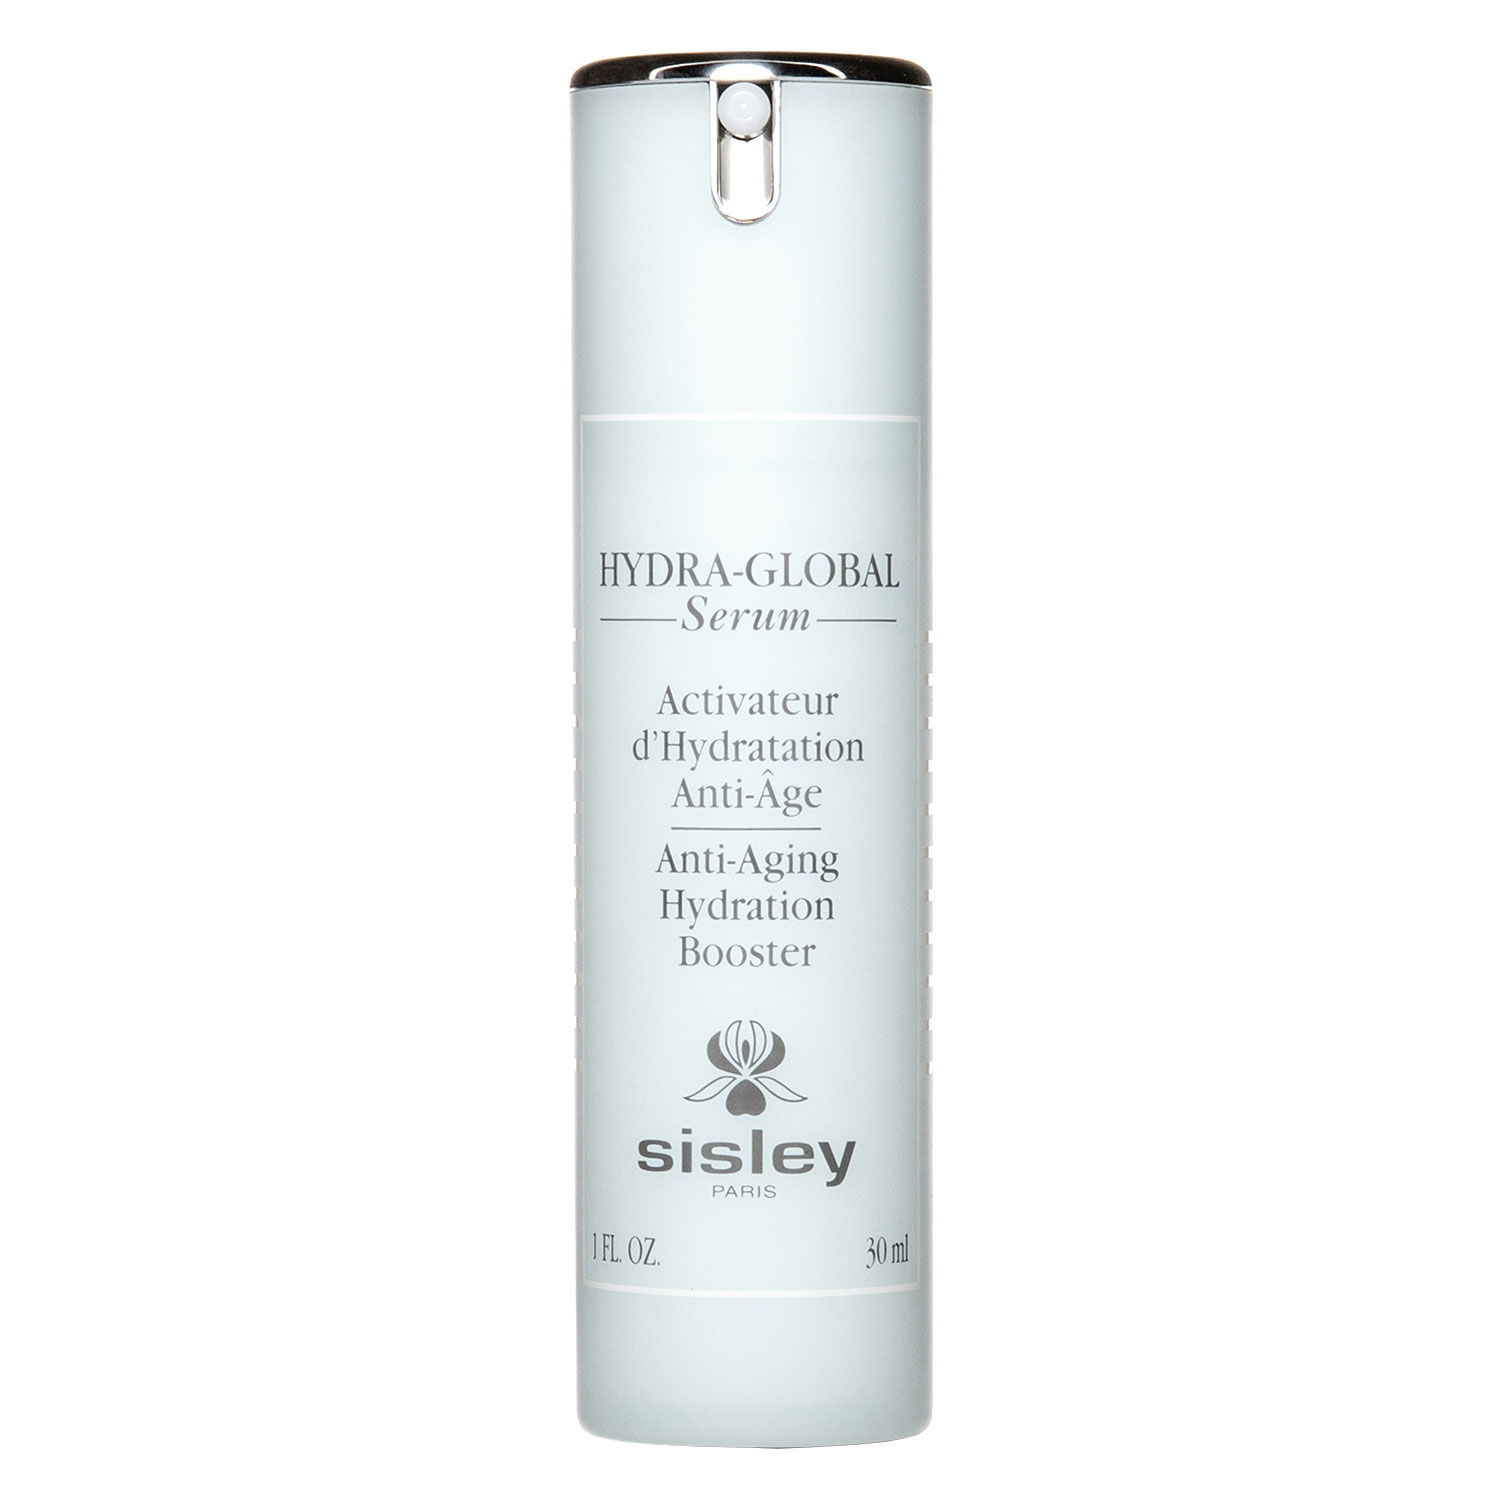 Product image from Sisley Skincare - Hydra-Global Sérum